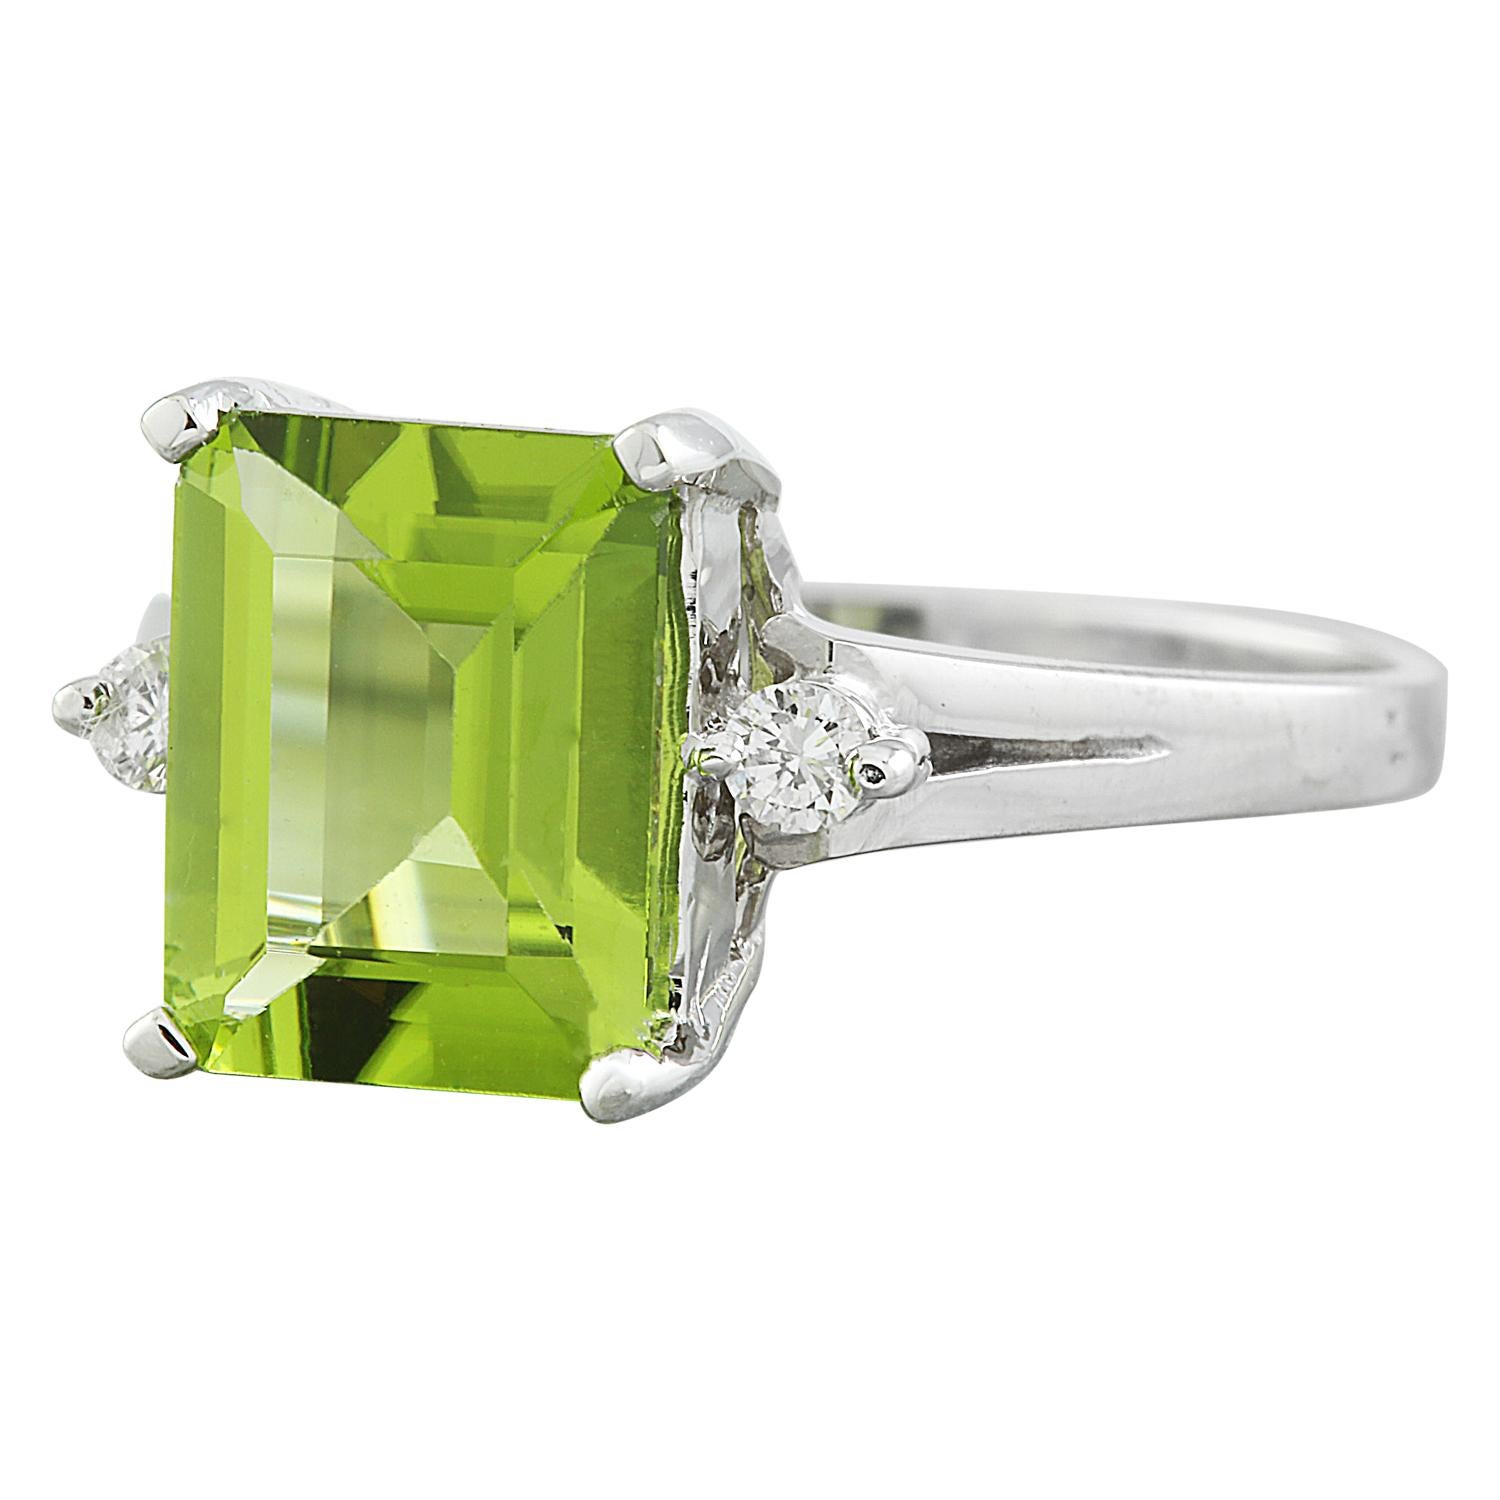 2.26 Carat Natural Peridot 14 Karat Solid White Gold Diamond Ring
Stamped: 14K 
Stamped: 14K 
Ring Size 7
Total Ring Weight: 2.9 Grams 
Peridot Weight 2.20 Carat (9.00x7.00 Millimeters)
Natural Peridot Treatment: Heating Only
Diamond Weight: 0.06